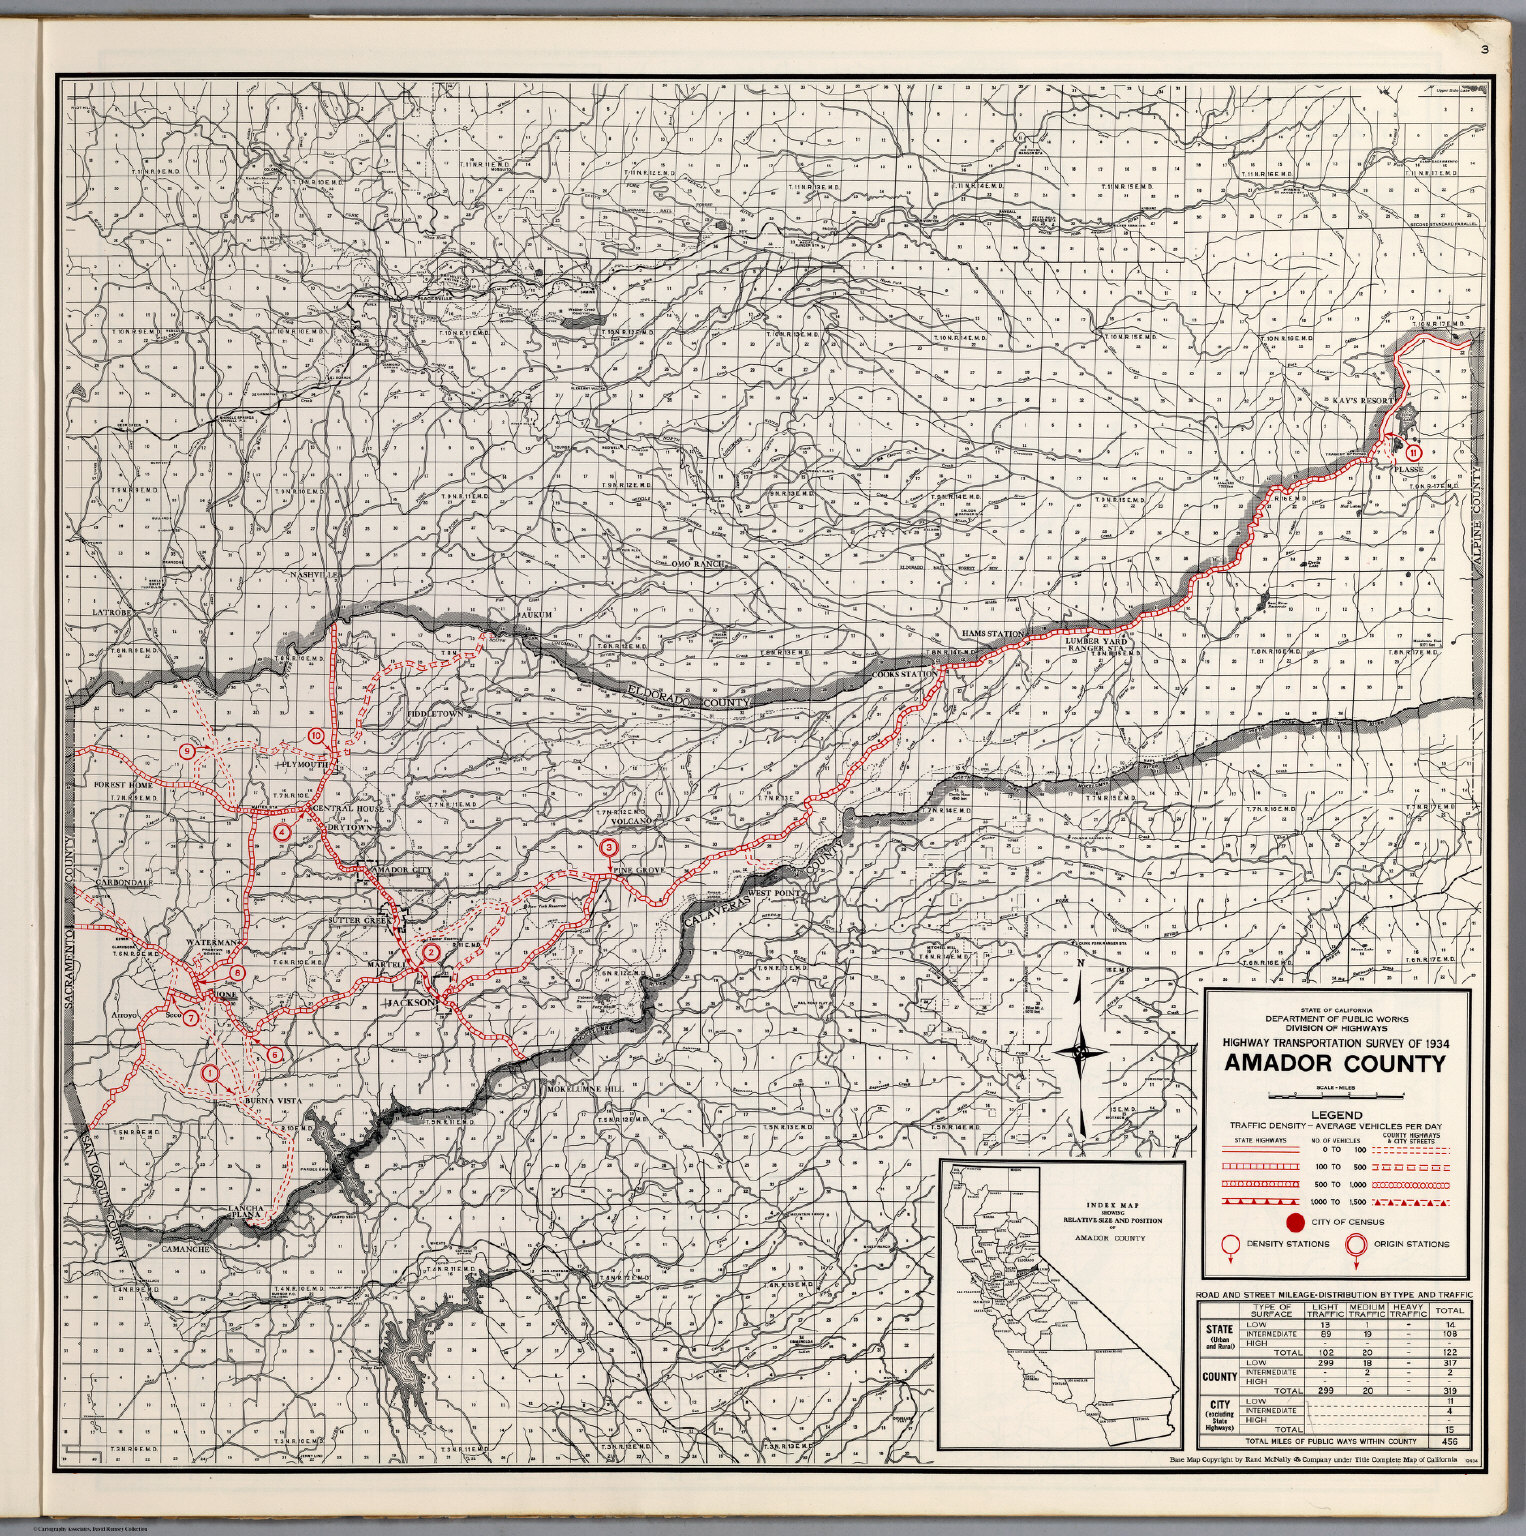 Amador County David Rumsey Historical Map Collection